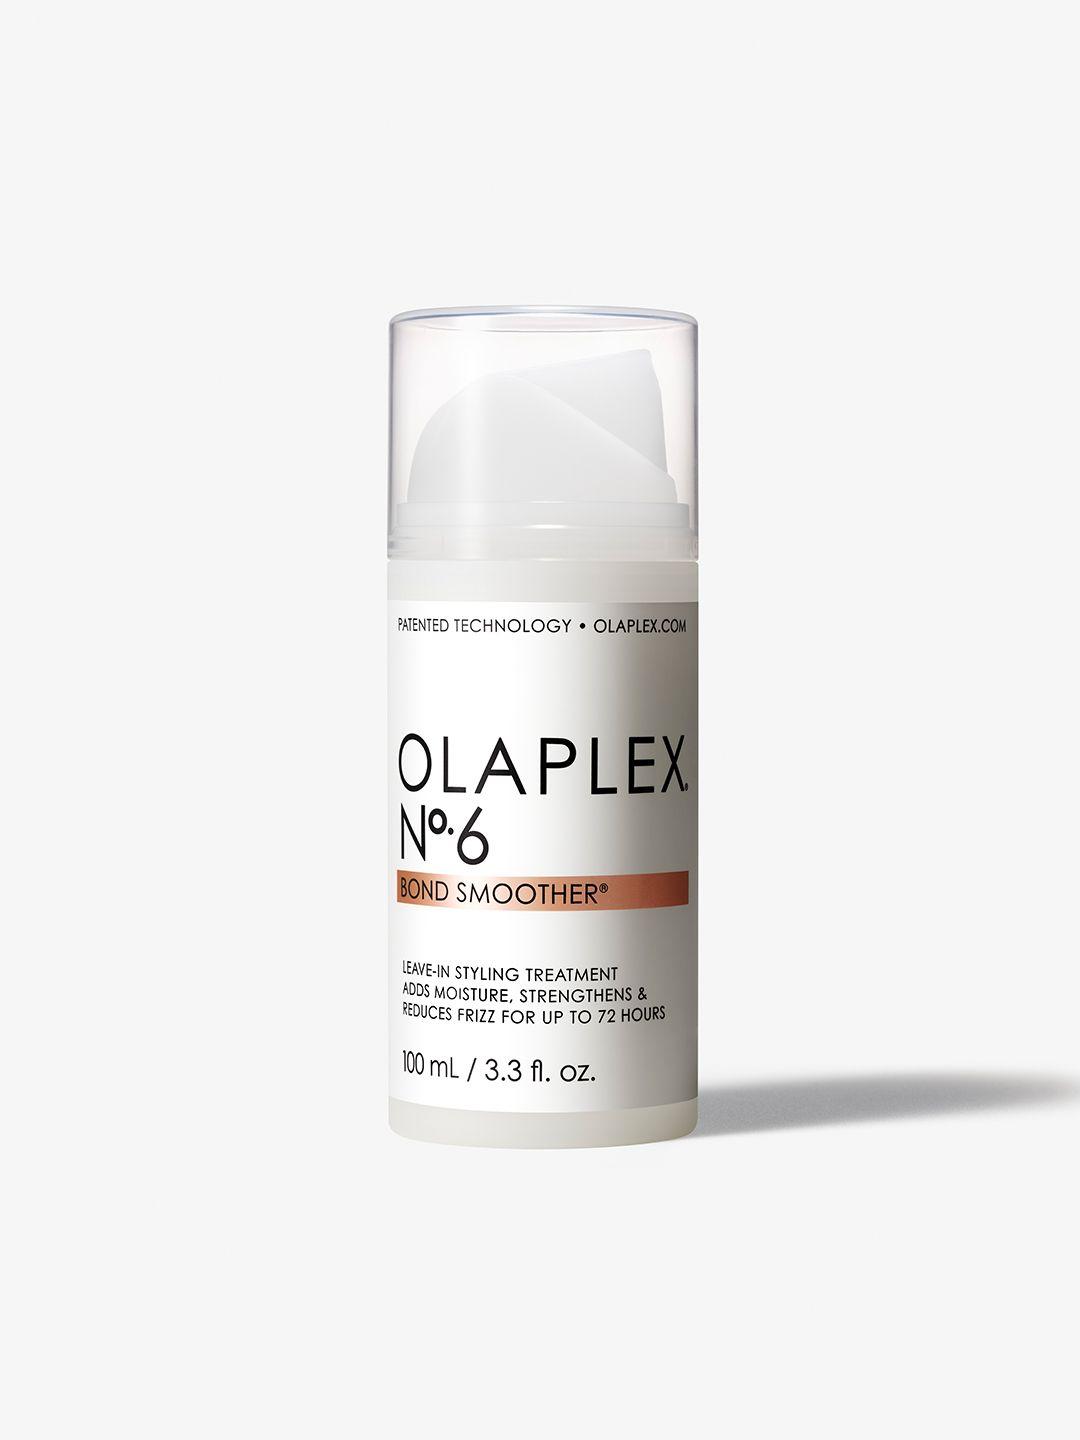 olaplex no. 6 bond smoother leave-in styling hair cream - 100ml